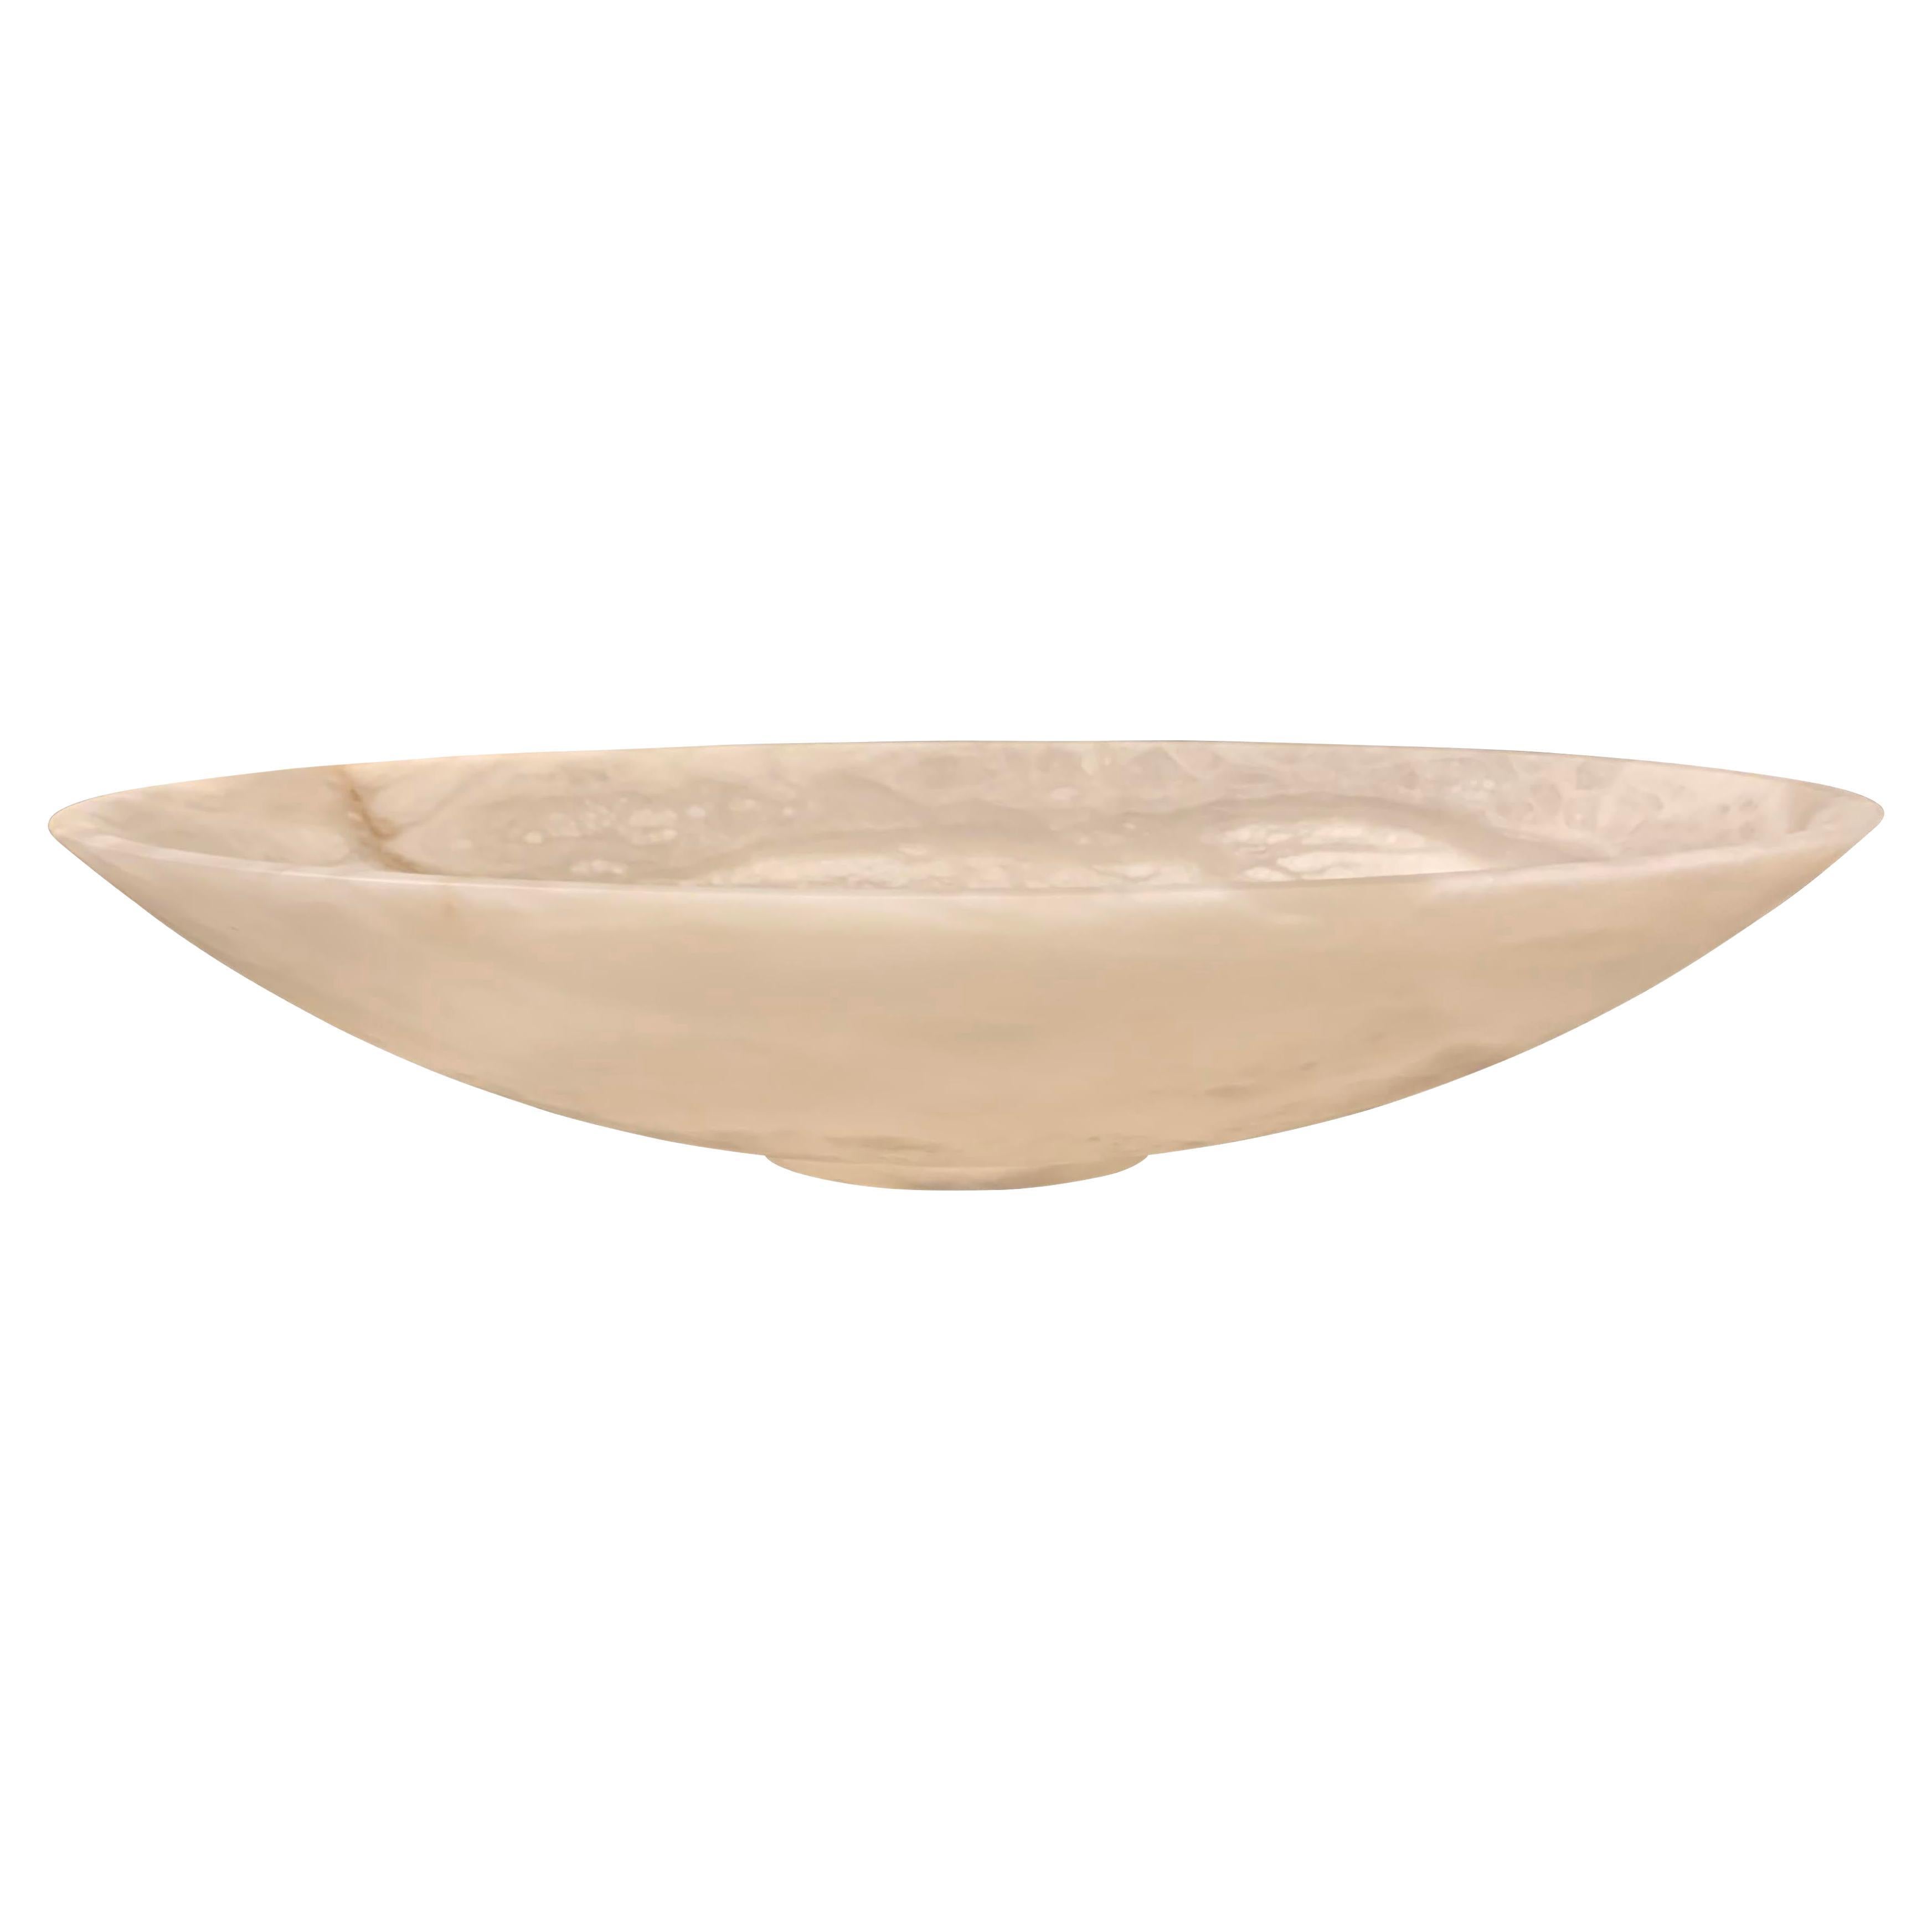 Contemporary Italian large oval shaped alabaster bowl.
Honed finish.
Part of a collection of Italian alabaster bowls.